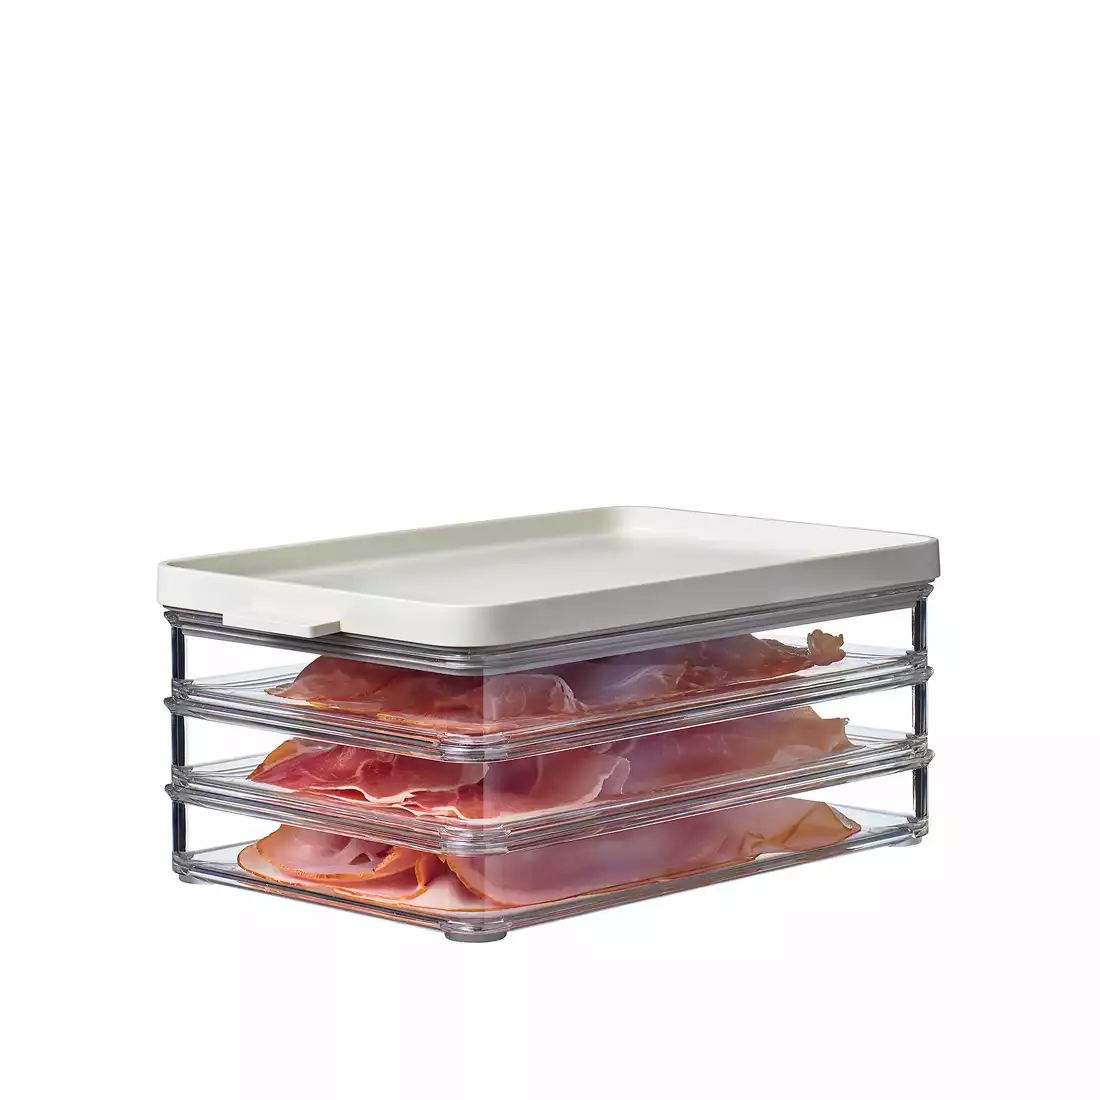 MEPAL OMNIA cold cuts container 500/3, nordic white